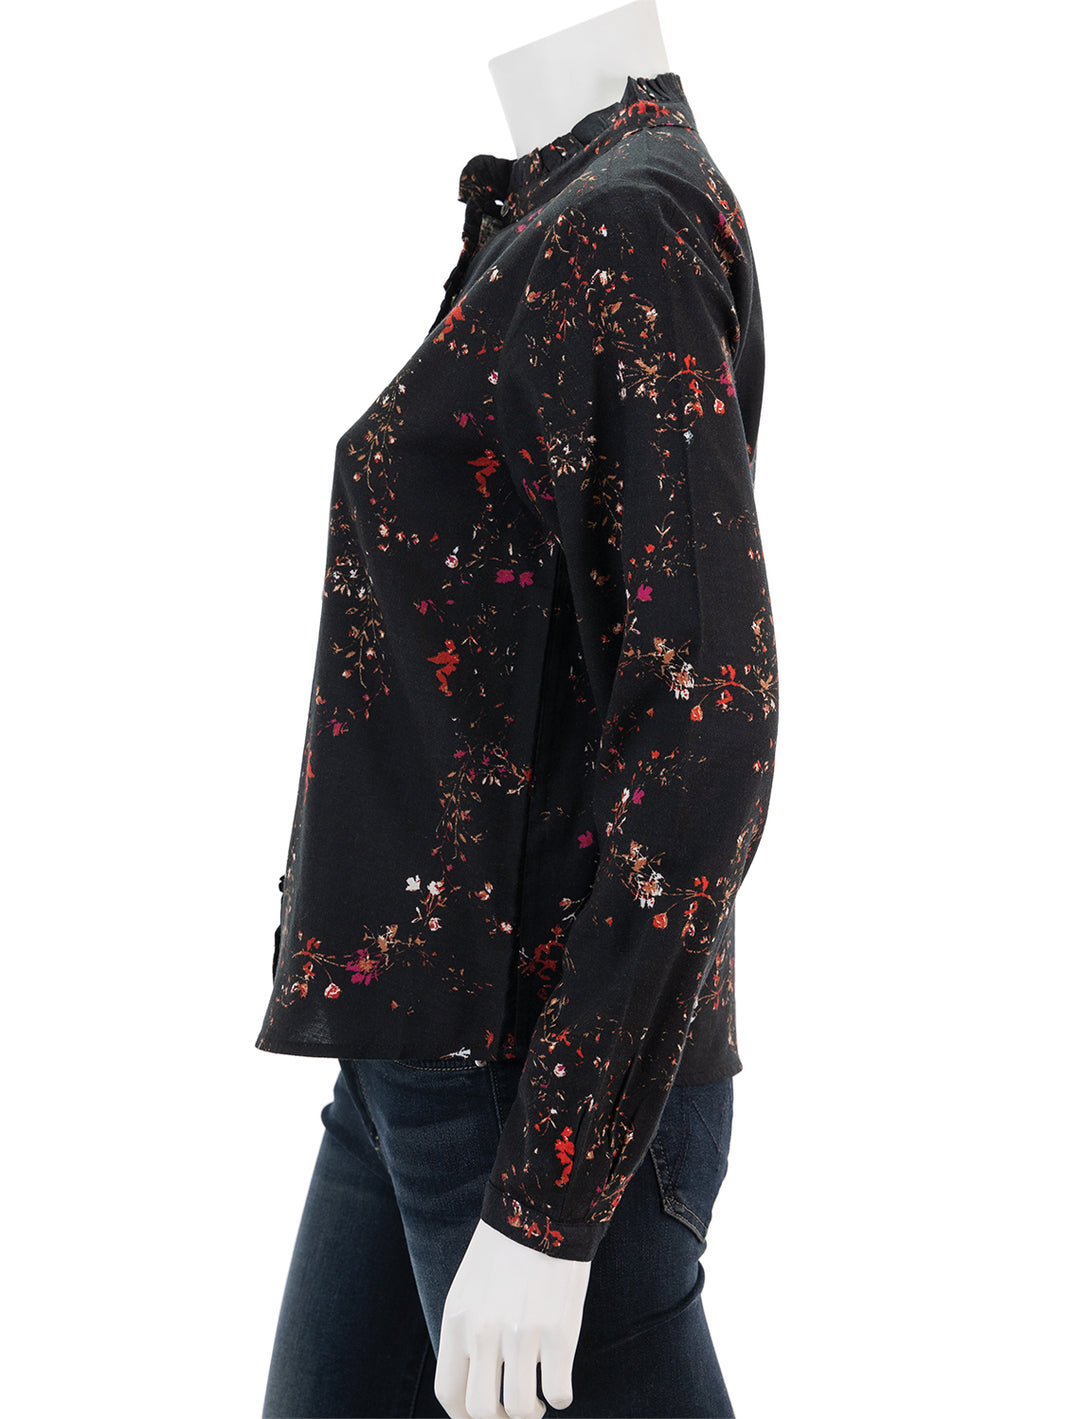 Side view of Lilla P.'s ruffle button down blouse in black floral print.